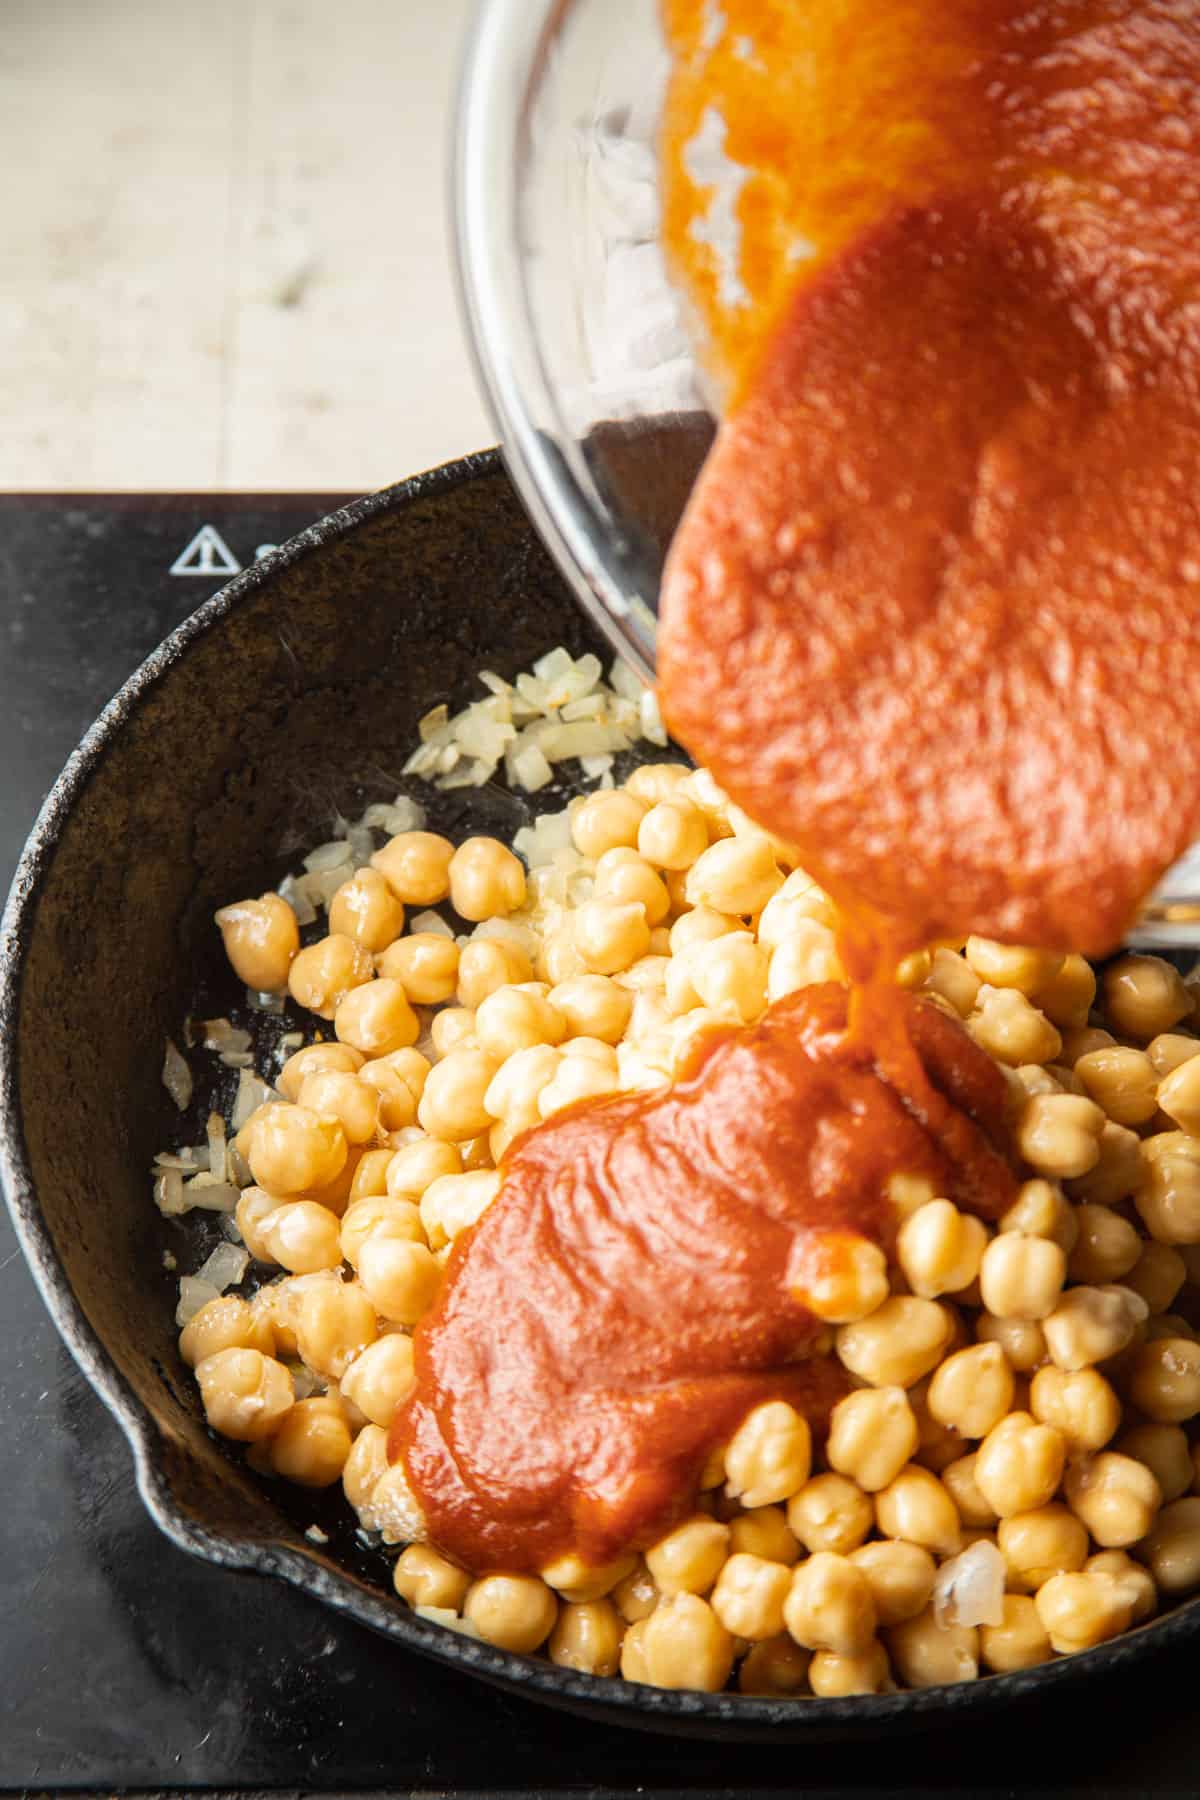 Sauce being poured into a skillet filled with chickpeas.